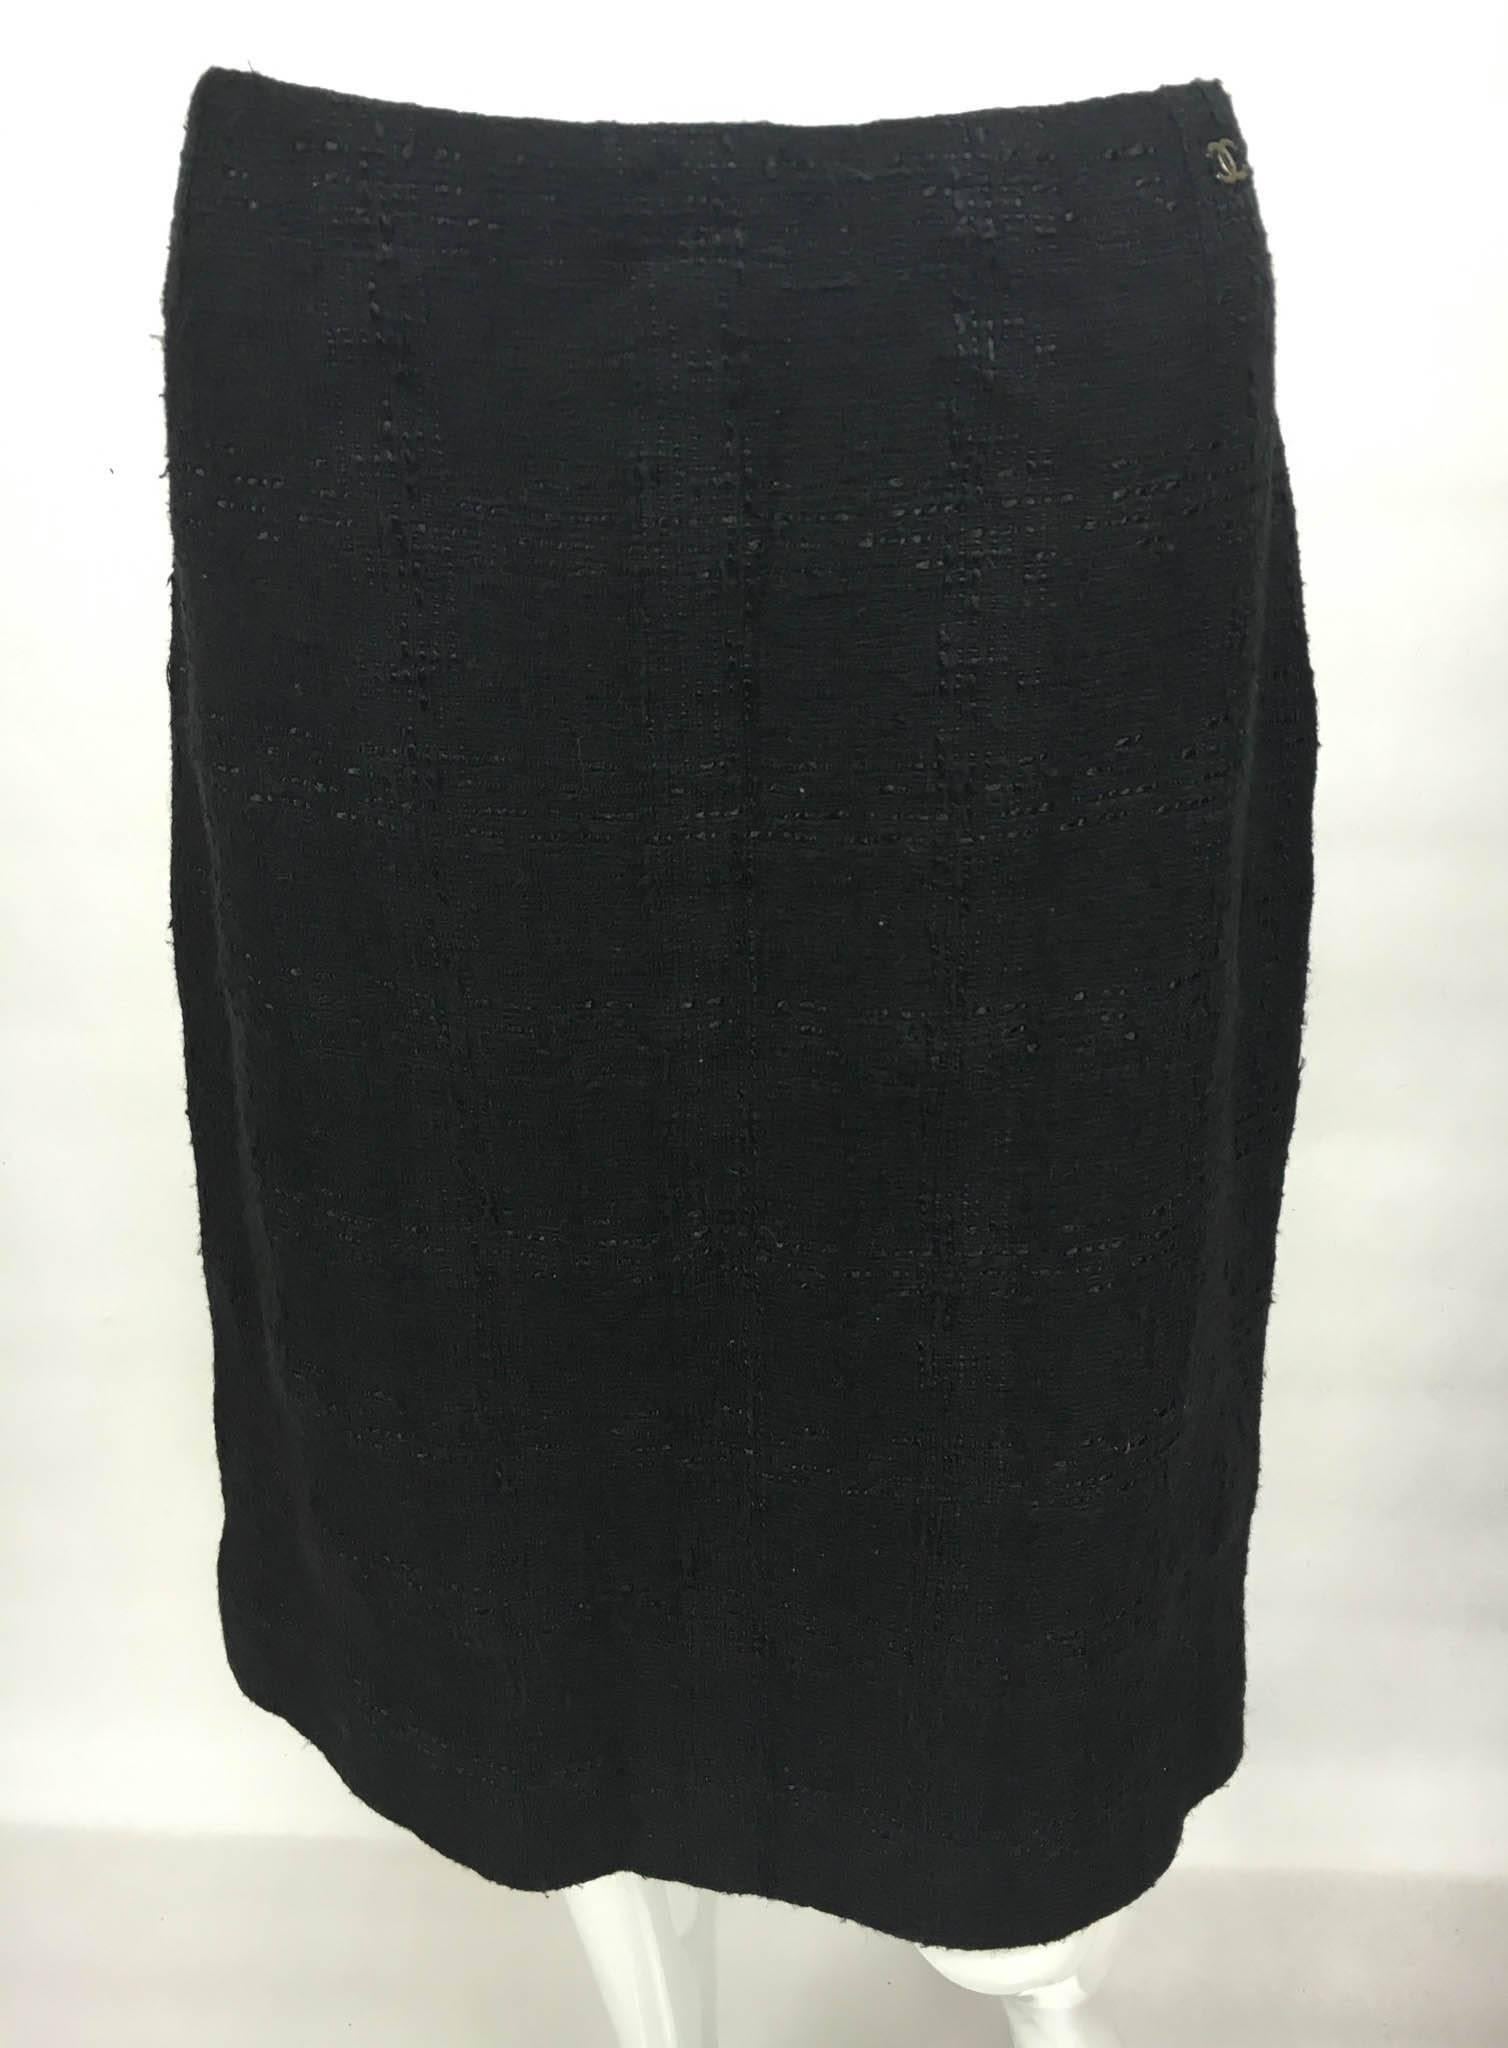 This stylish piece is a Chanel Black Boucle Skirt. Knee-length, it has a slit at the back. It features an invisible side zipper and the iconic Chanel ‘CC’ logo in metal at the waist. A bit of timeless class by Chanel.

Label / Designer: